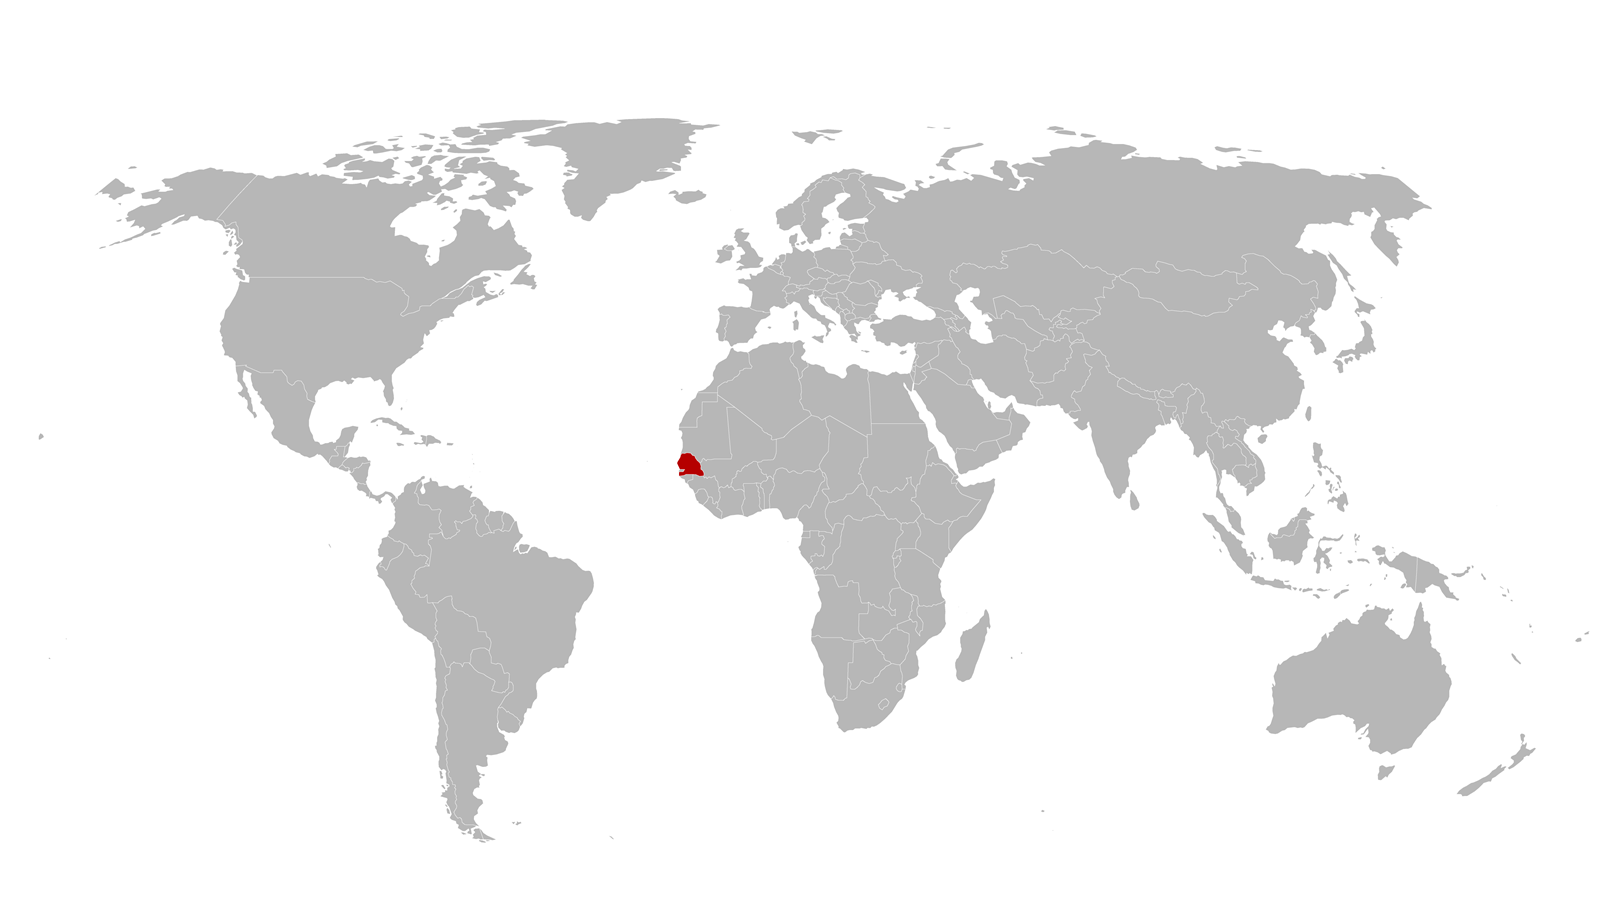 World map with Senegal hightlighted